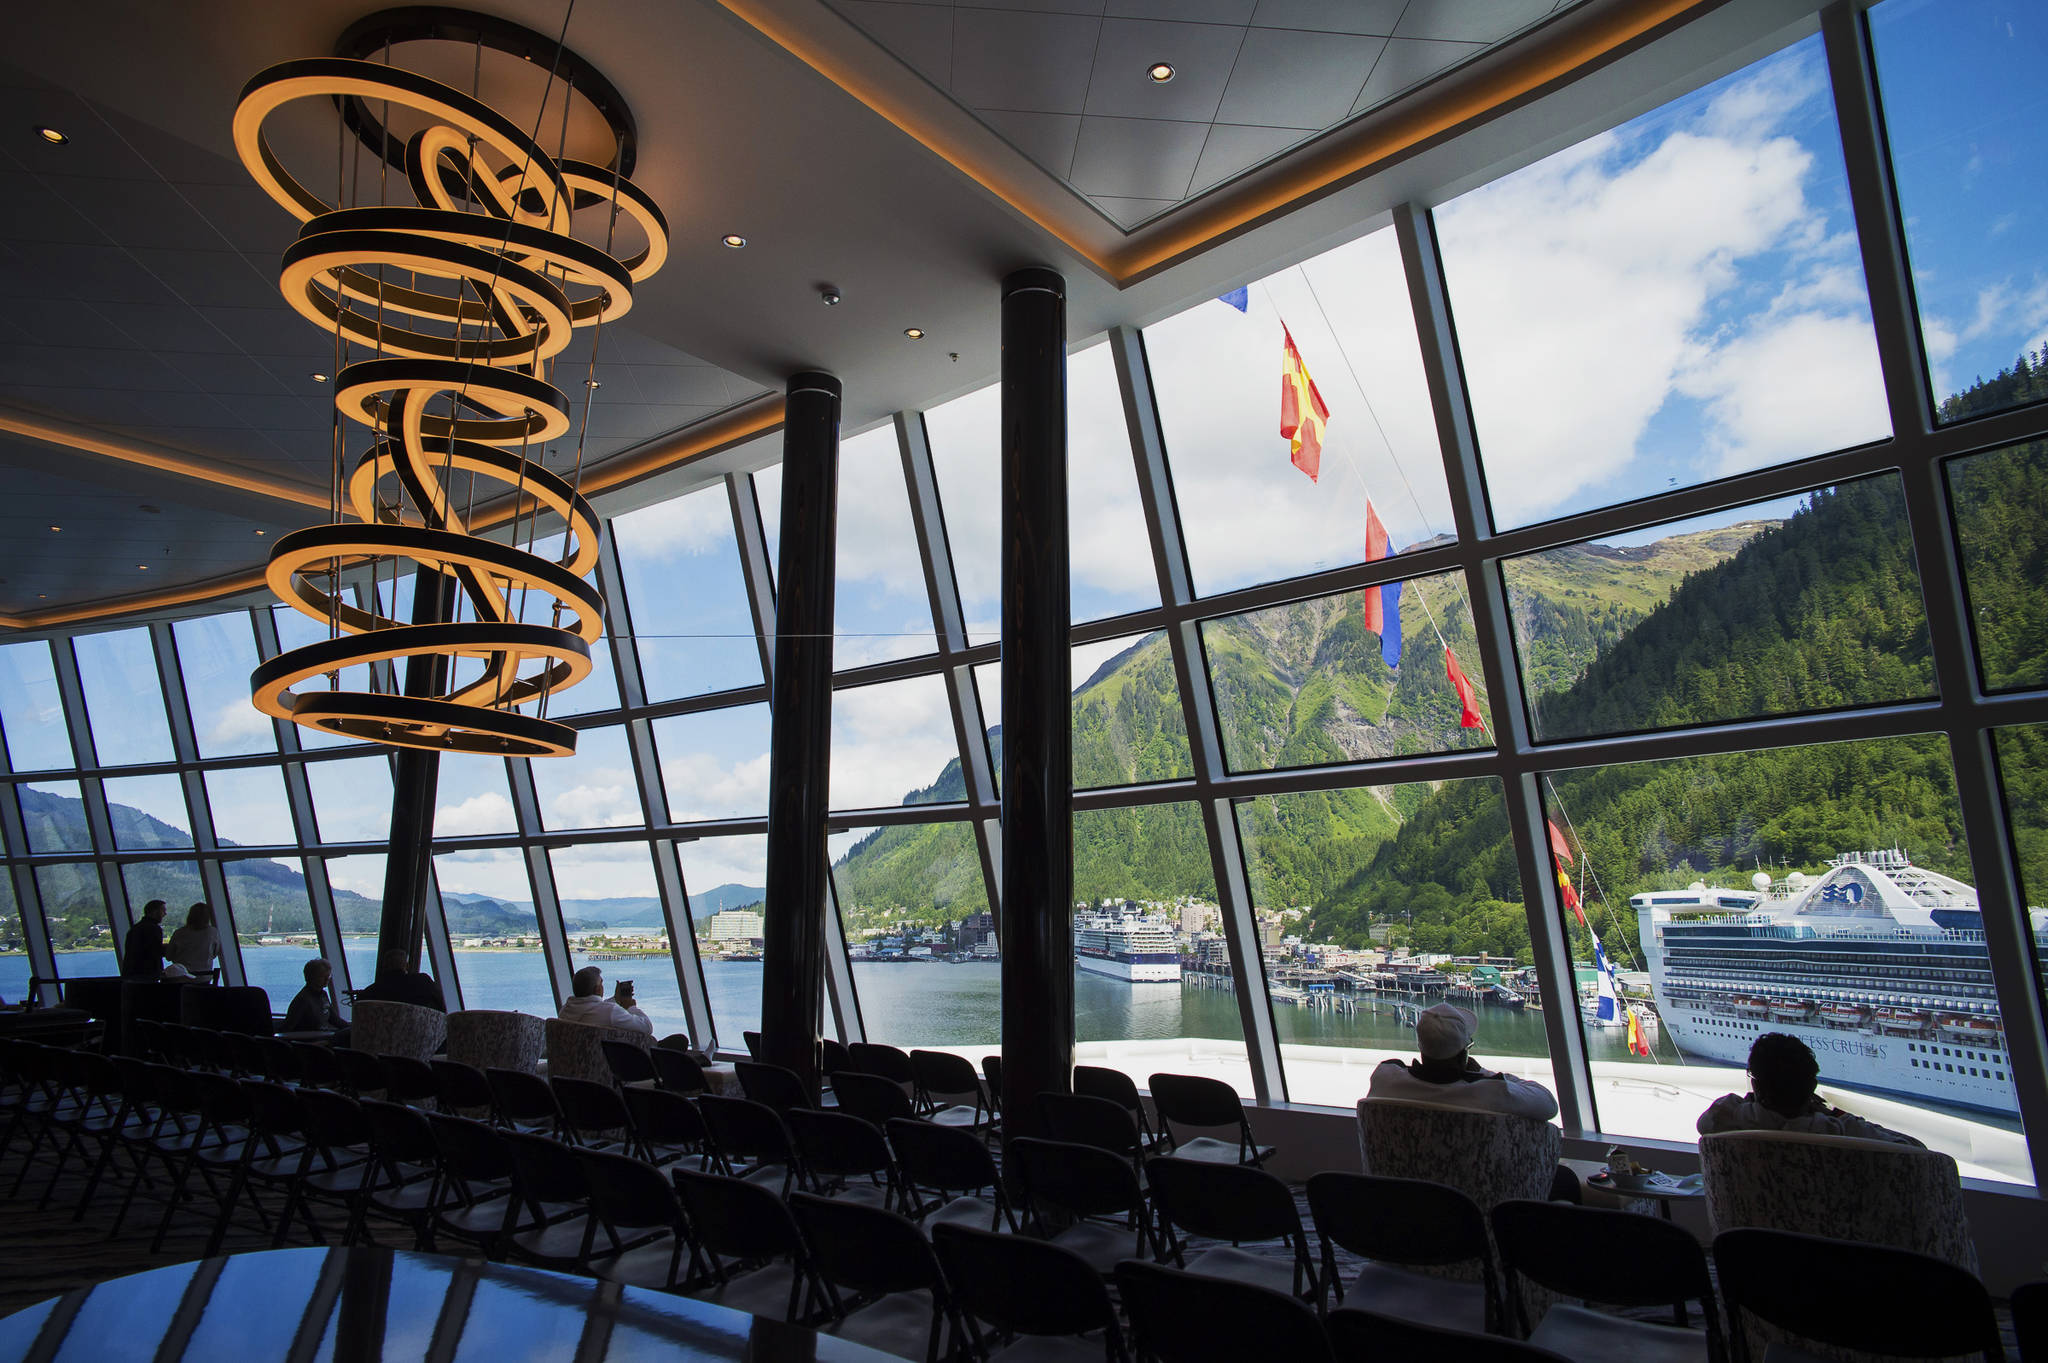 Juneau residents tour the Norwegian Bliss after Plaque Presentations on Tuesday, June 12, 2018. The event included Mayor Ken Koelsch, Capt. Stephen R. White , of Coast Guard Sector Juneau, Mike Satre, of the Juneau Chamber of Commerce, Liz Perry, of Travel Juneau, Drew Green, port manager for Cruise Line Agencies of Alaska, and Carl Uchytil, Juneau Port Director, Toni Mallott, wife of Lt. Gov. Byron Mallott, and Emily Edenshaw and Jodie Gatti, of Tlingit & Haida Central Council. (Michael Penn | Juneau Empire)